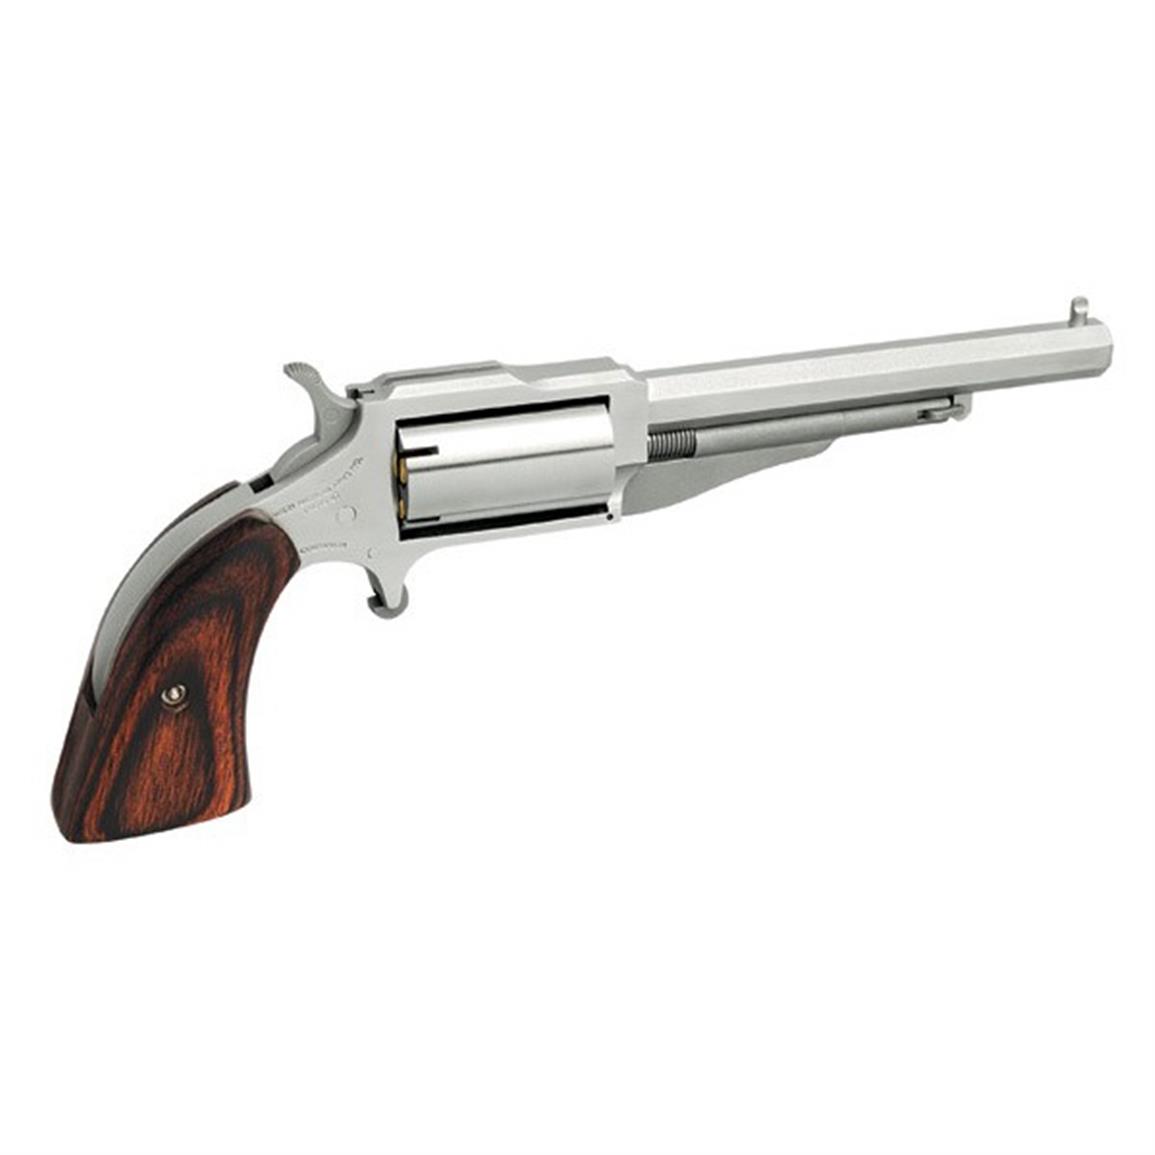 NAA 1860 The Earl with .22LR Conversion Cylinder, Revolver, .22 Magnum, Rimfire, 18604C, 744253001994, 4 inch barrel